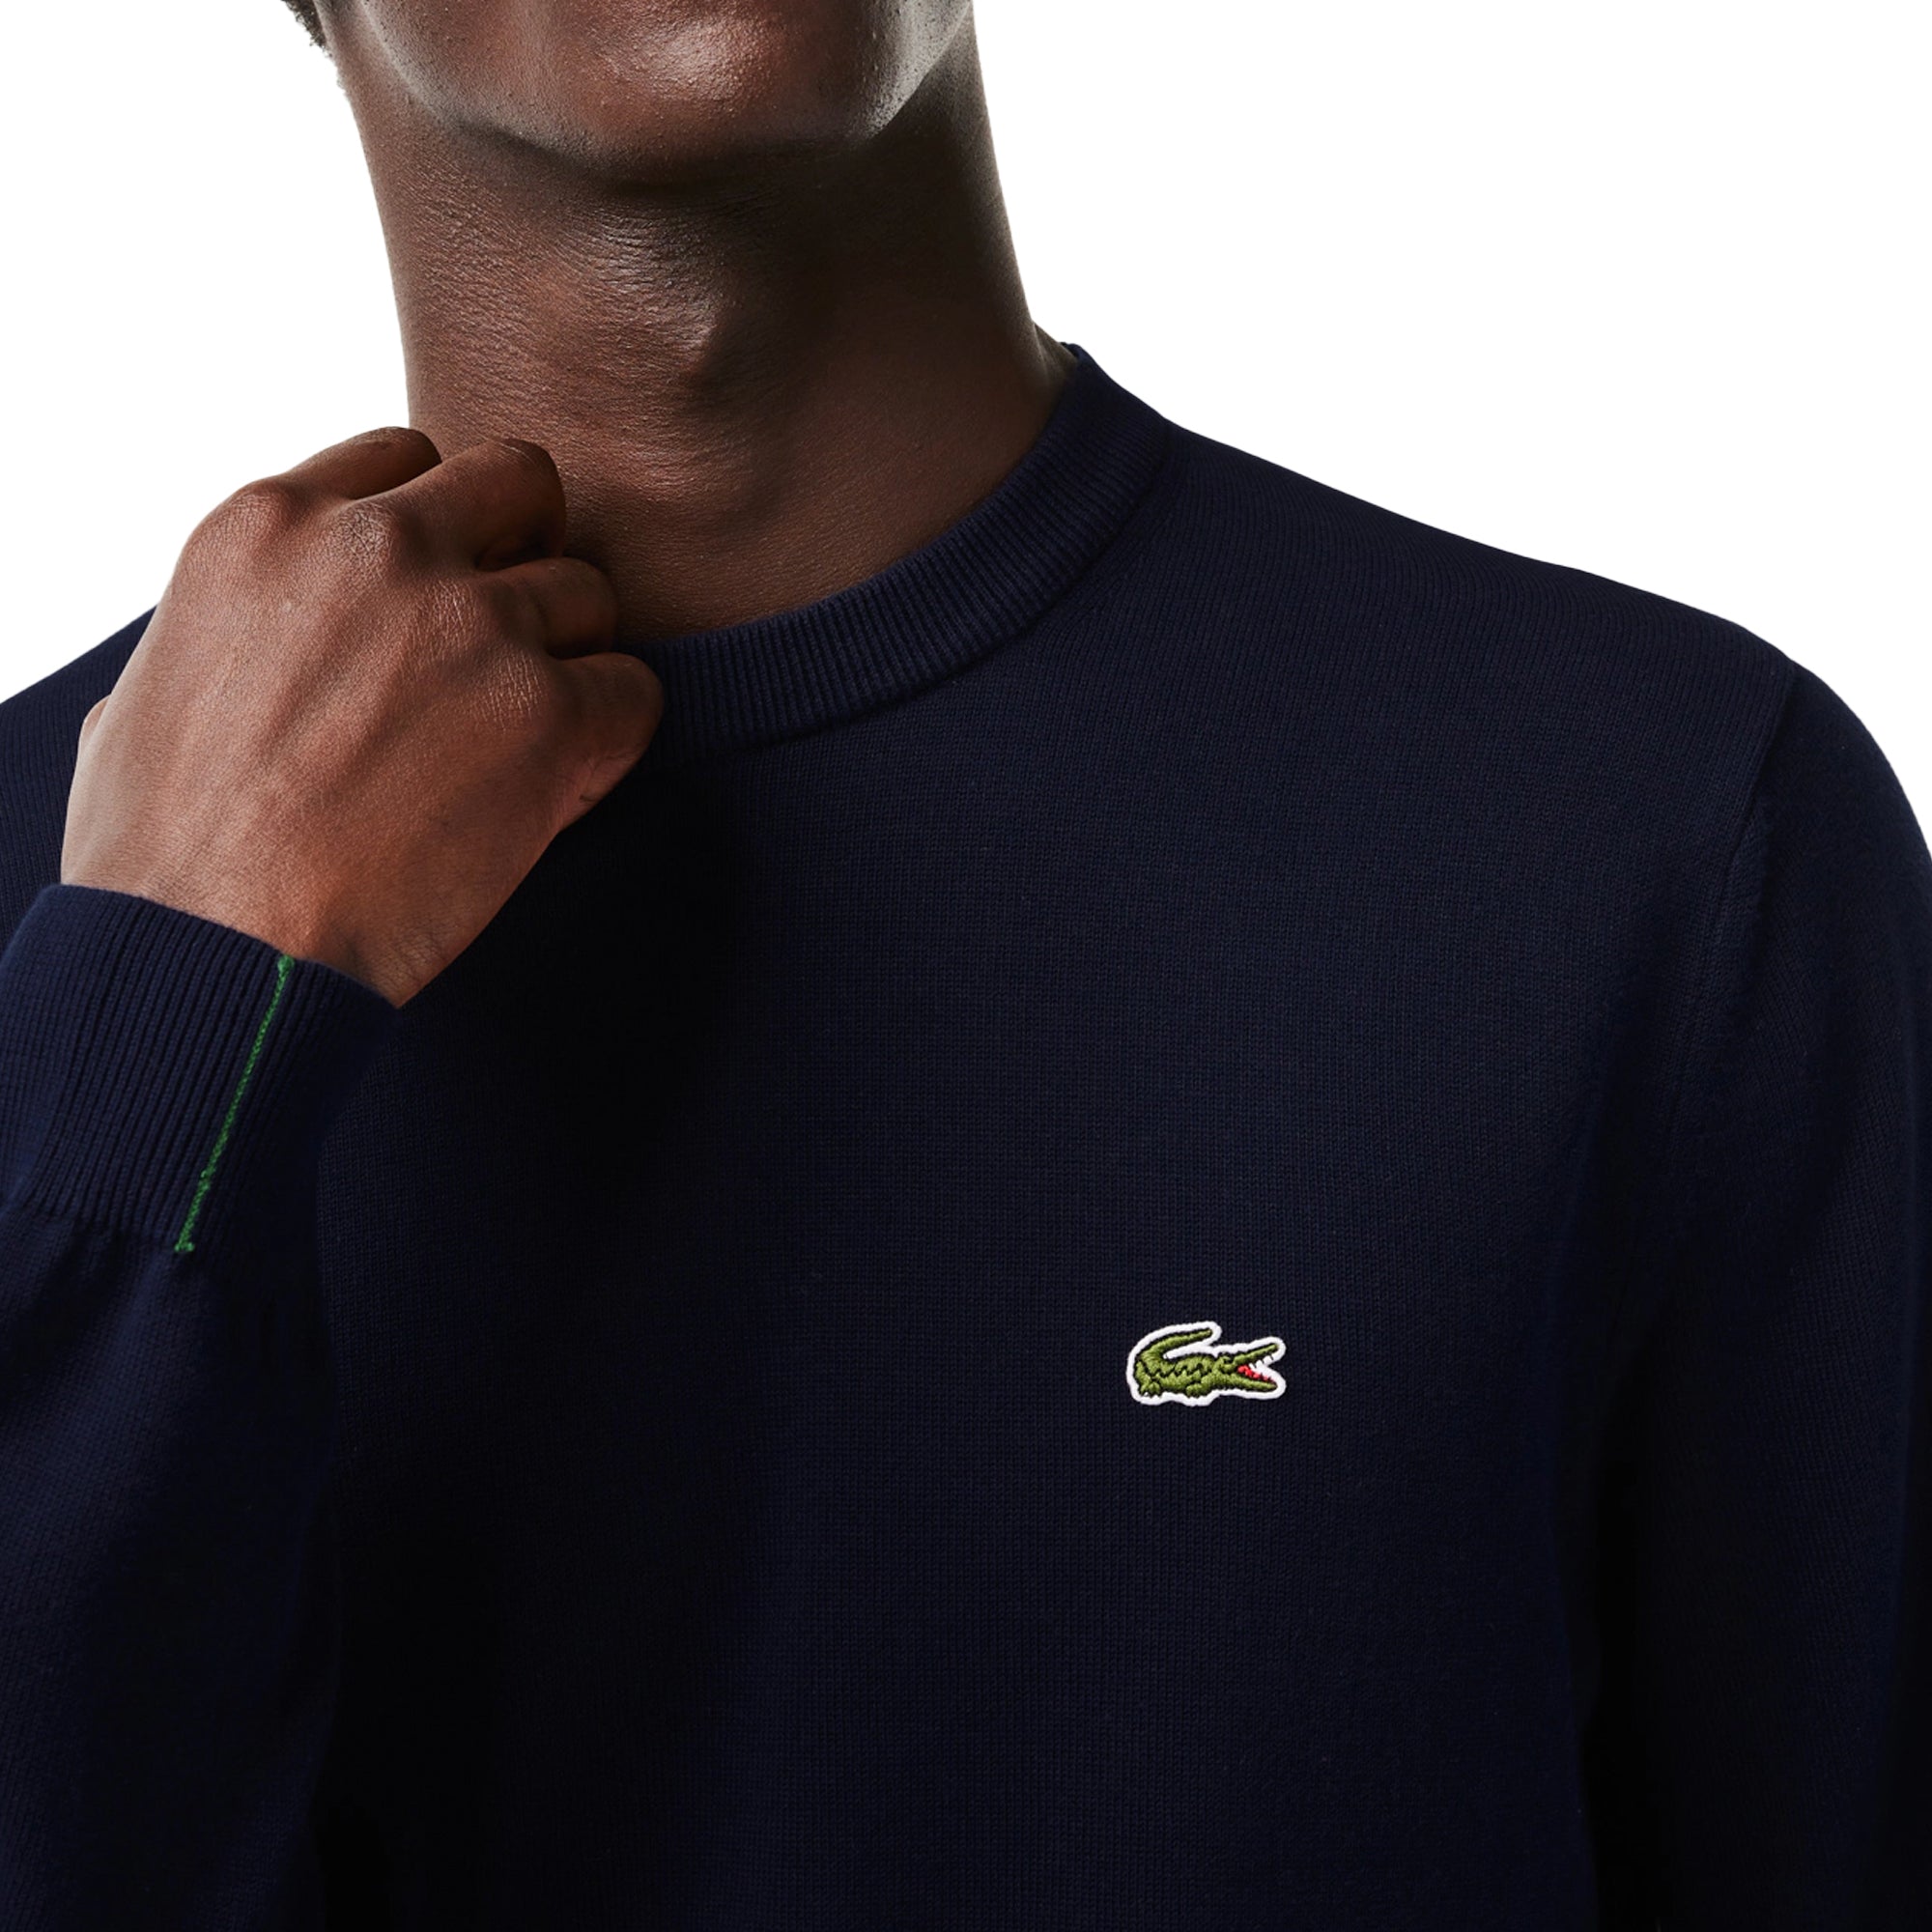 Lacoste New Cotton Crew Knit AH1985 - Navy